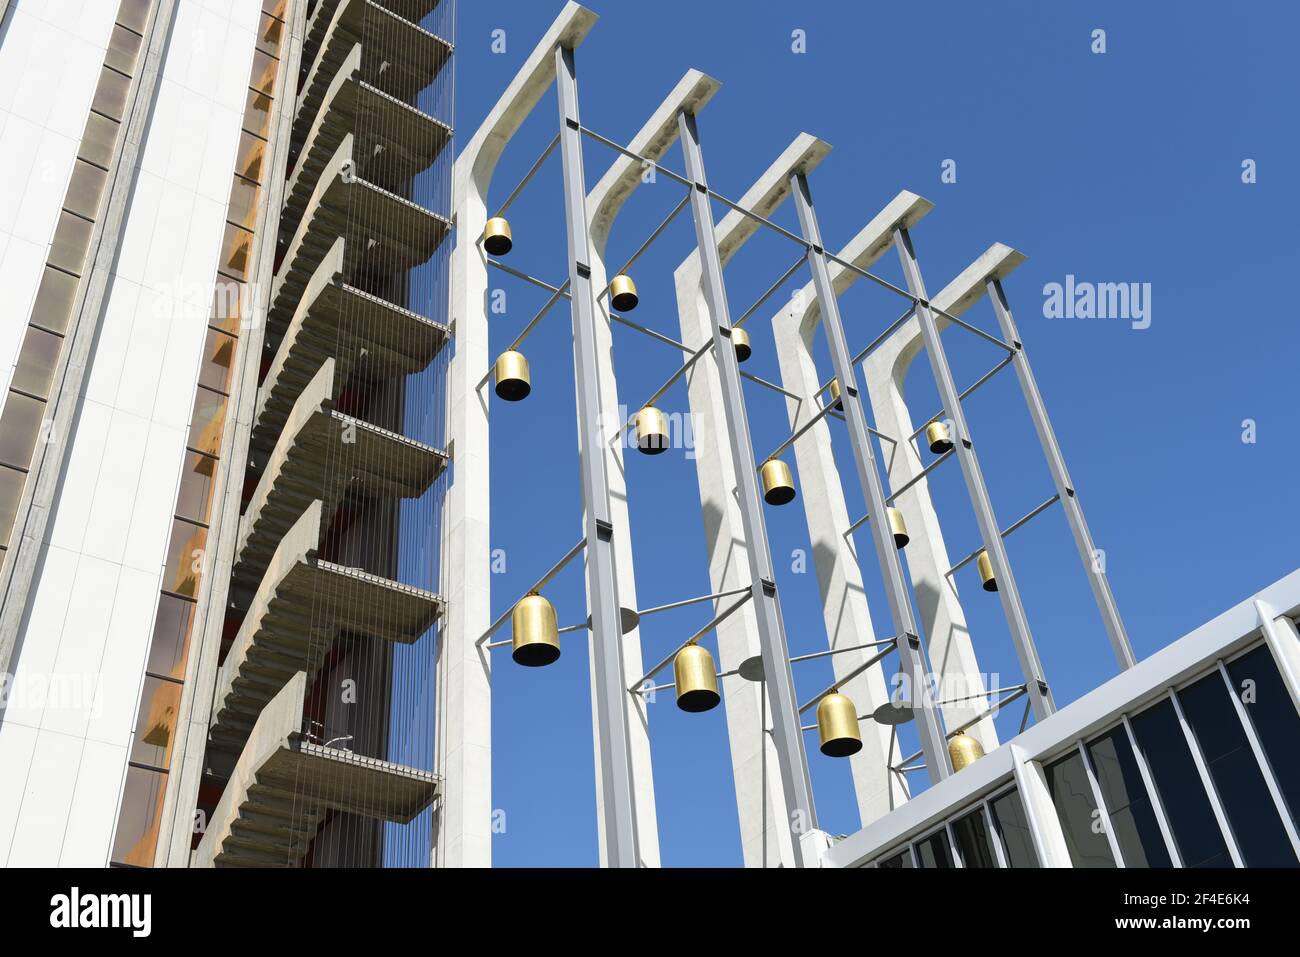 GARDEN GROVE, CALIFORNIA - 20 MAR 2021: Closeup of the Tower of Hope at the Crystal Cathedral. Stock Photo